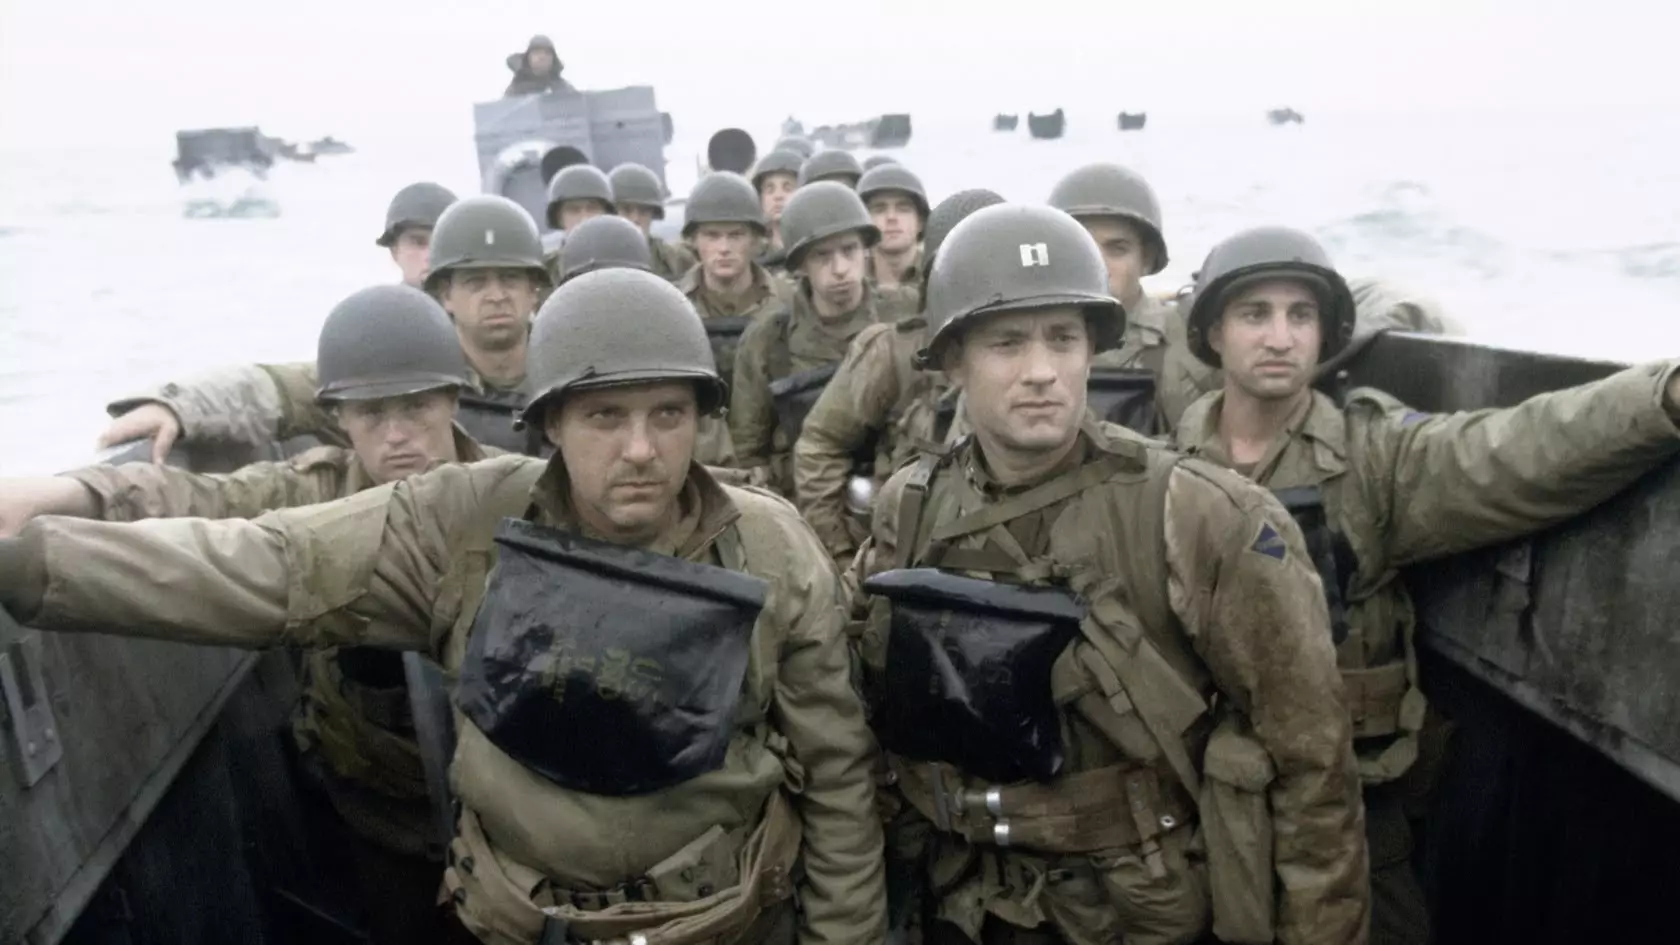 Lt Sidney Salomon Was The Inspiration For ‘Saving Private Ryan’ Opening